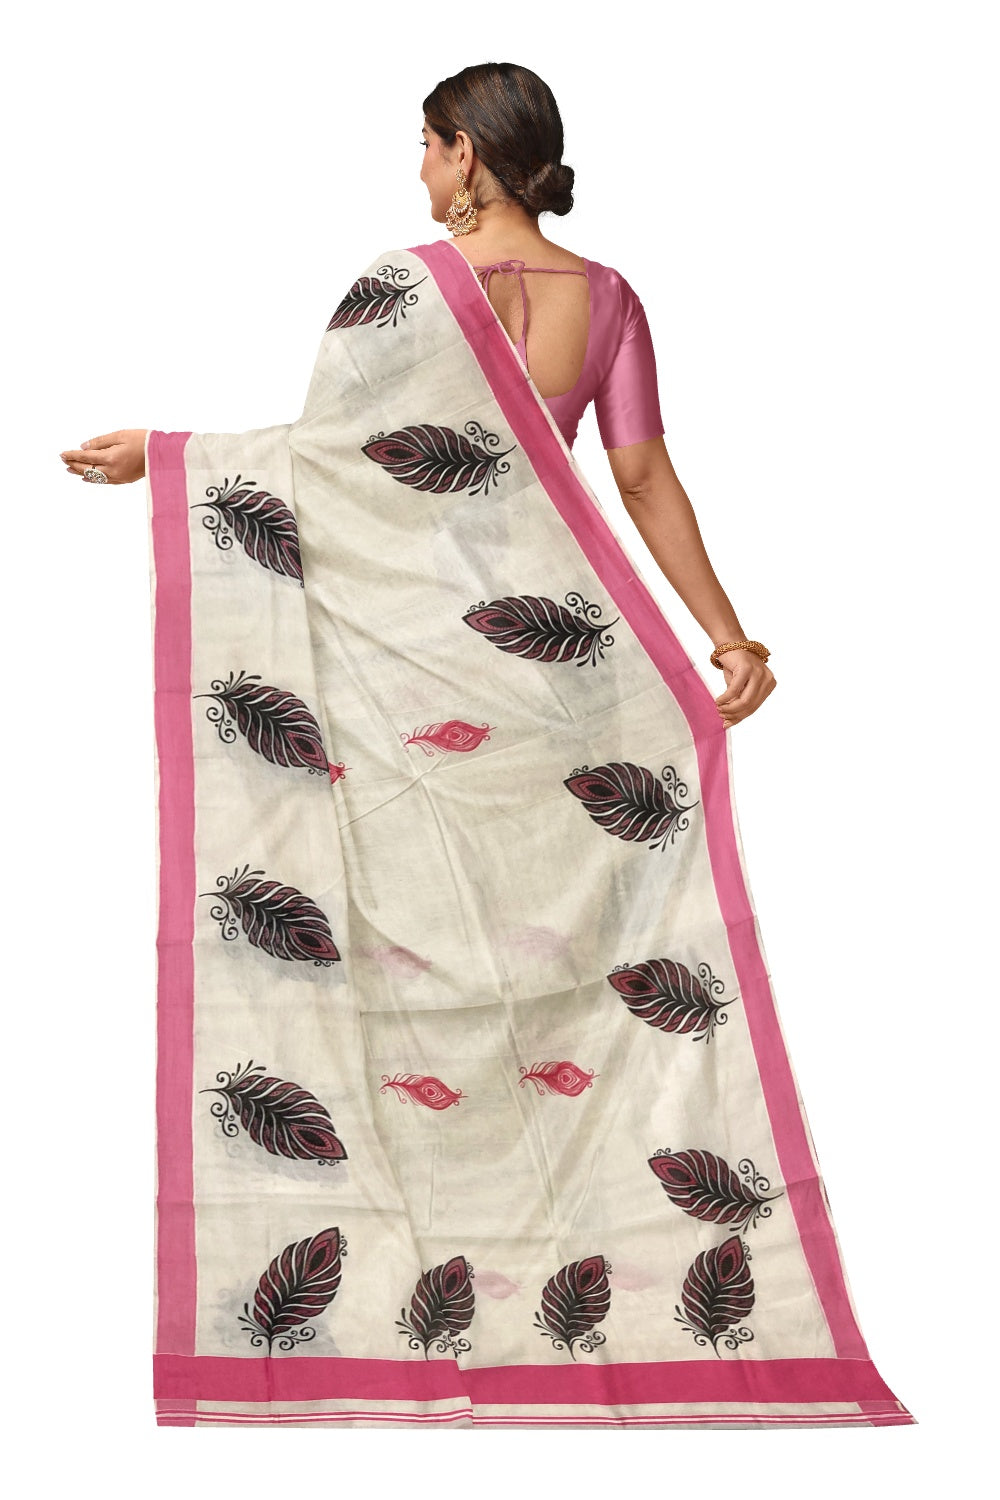 Pure Cotton Kerala Saree with Feather Block Printed Design and Pink Border